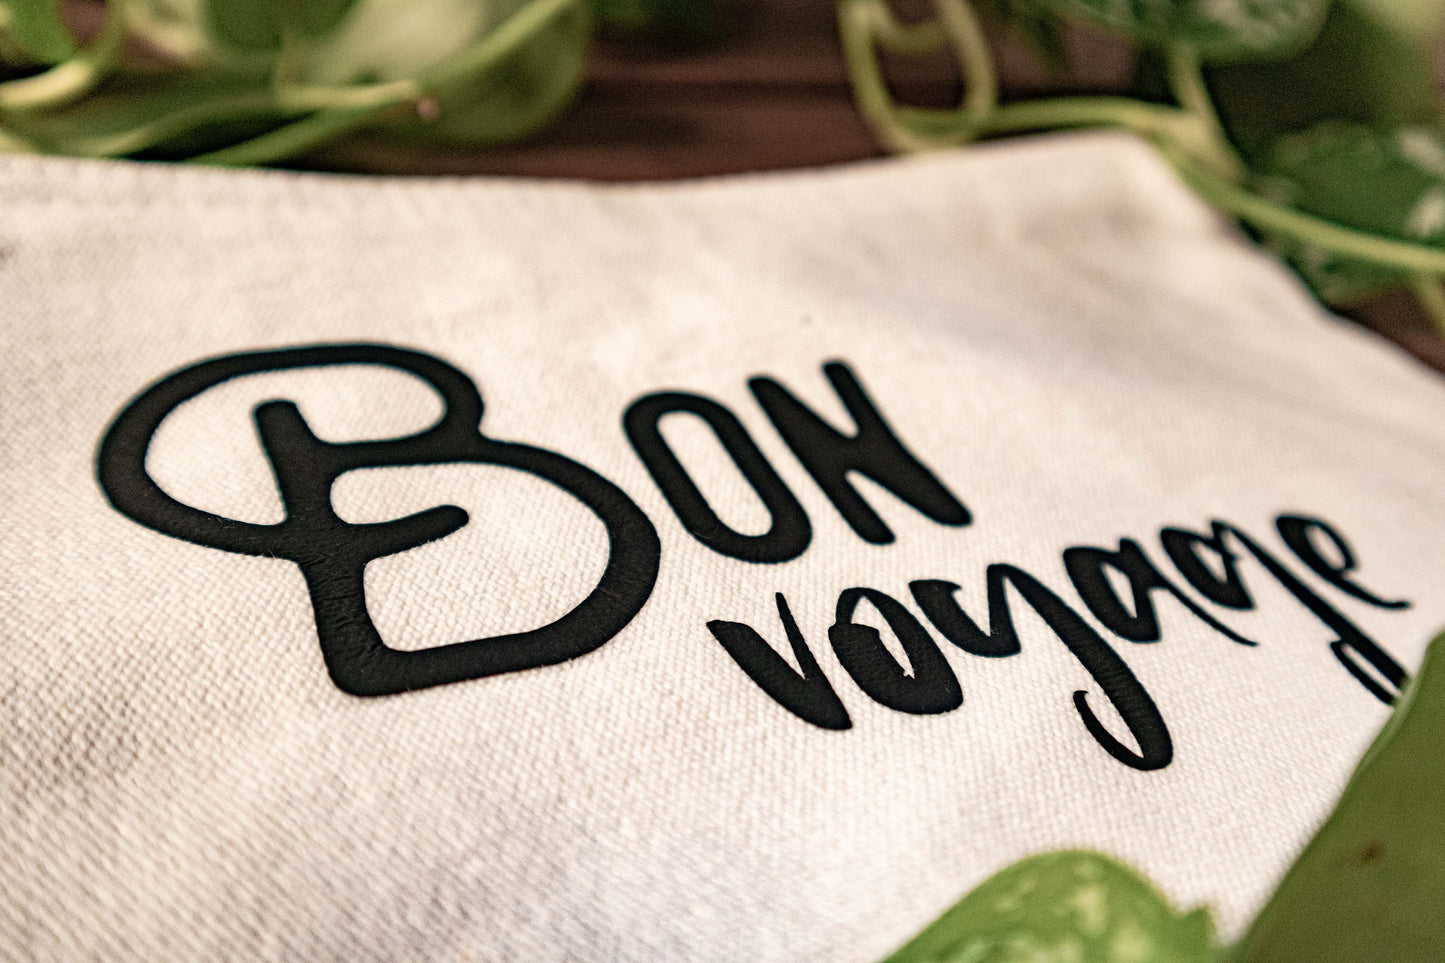 Bon Voyage - Funny Cotton Zipper Pouch for Travel, Makeup, toiletries, documents, snack, and more